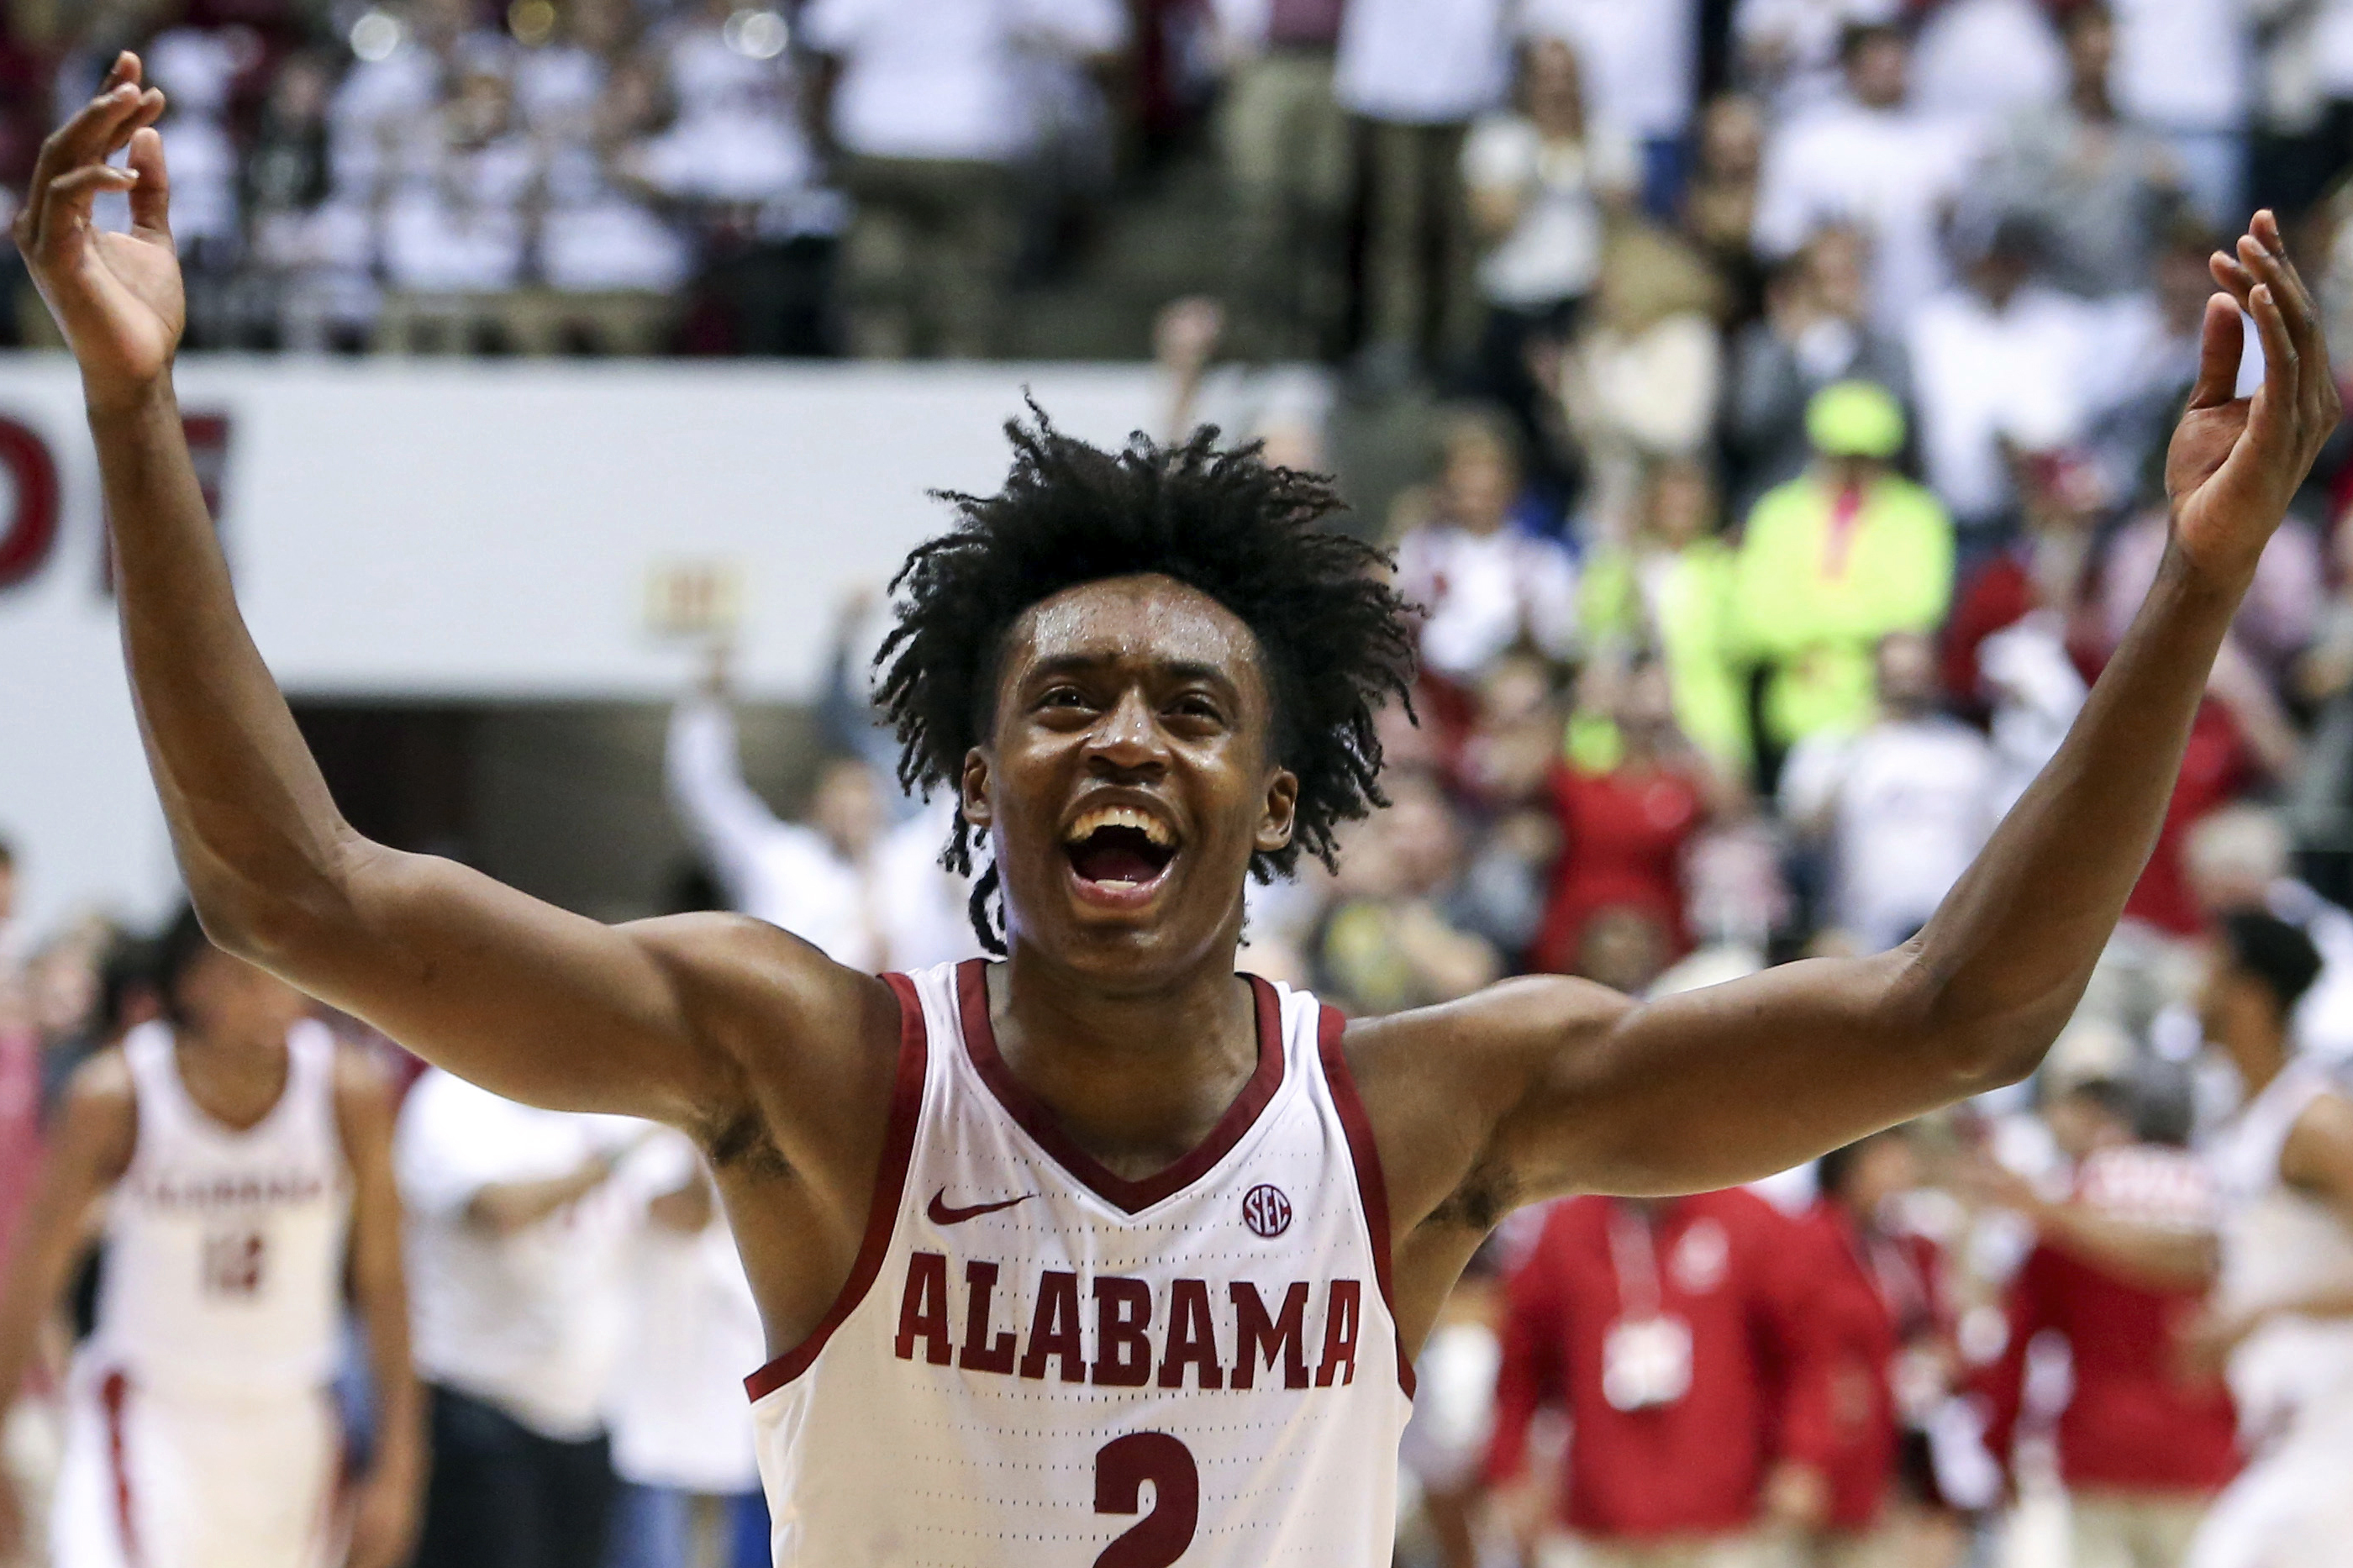 NBA draft combine: Five numbers to know about Collin Sexton - The Athletic